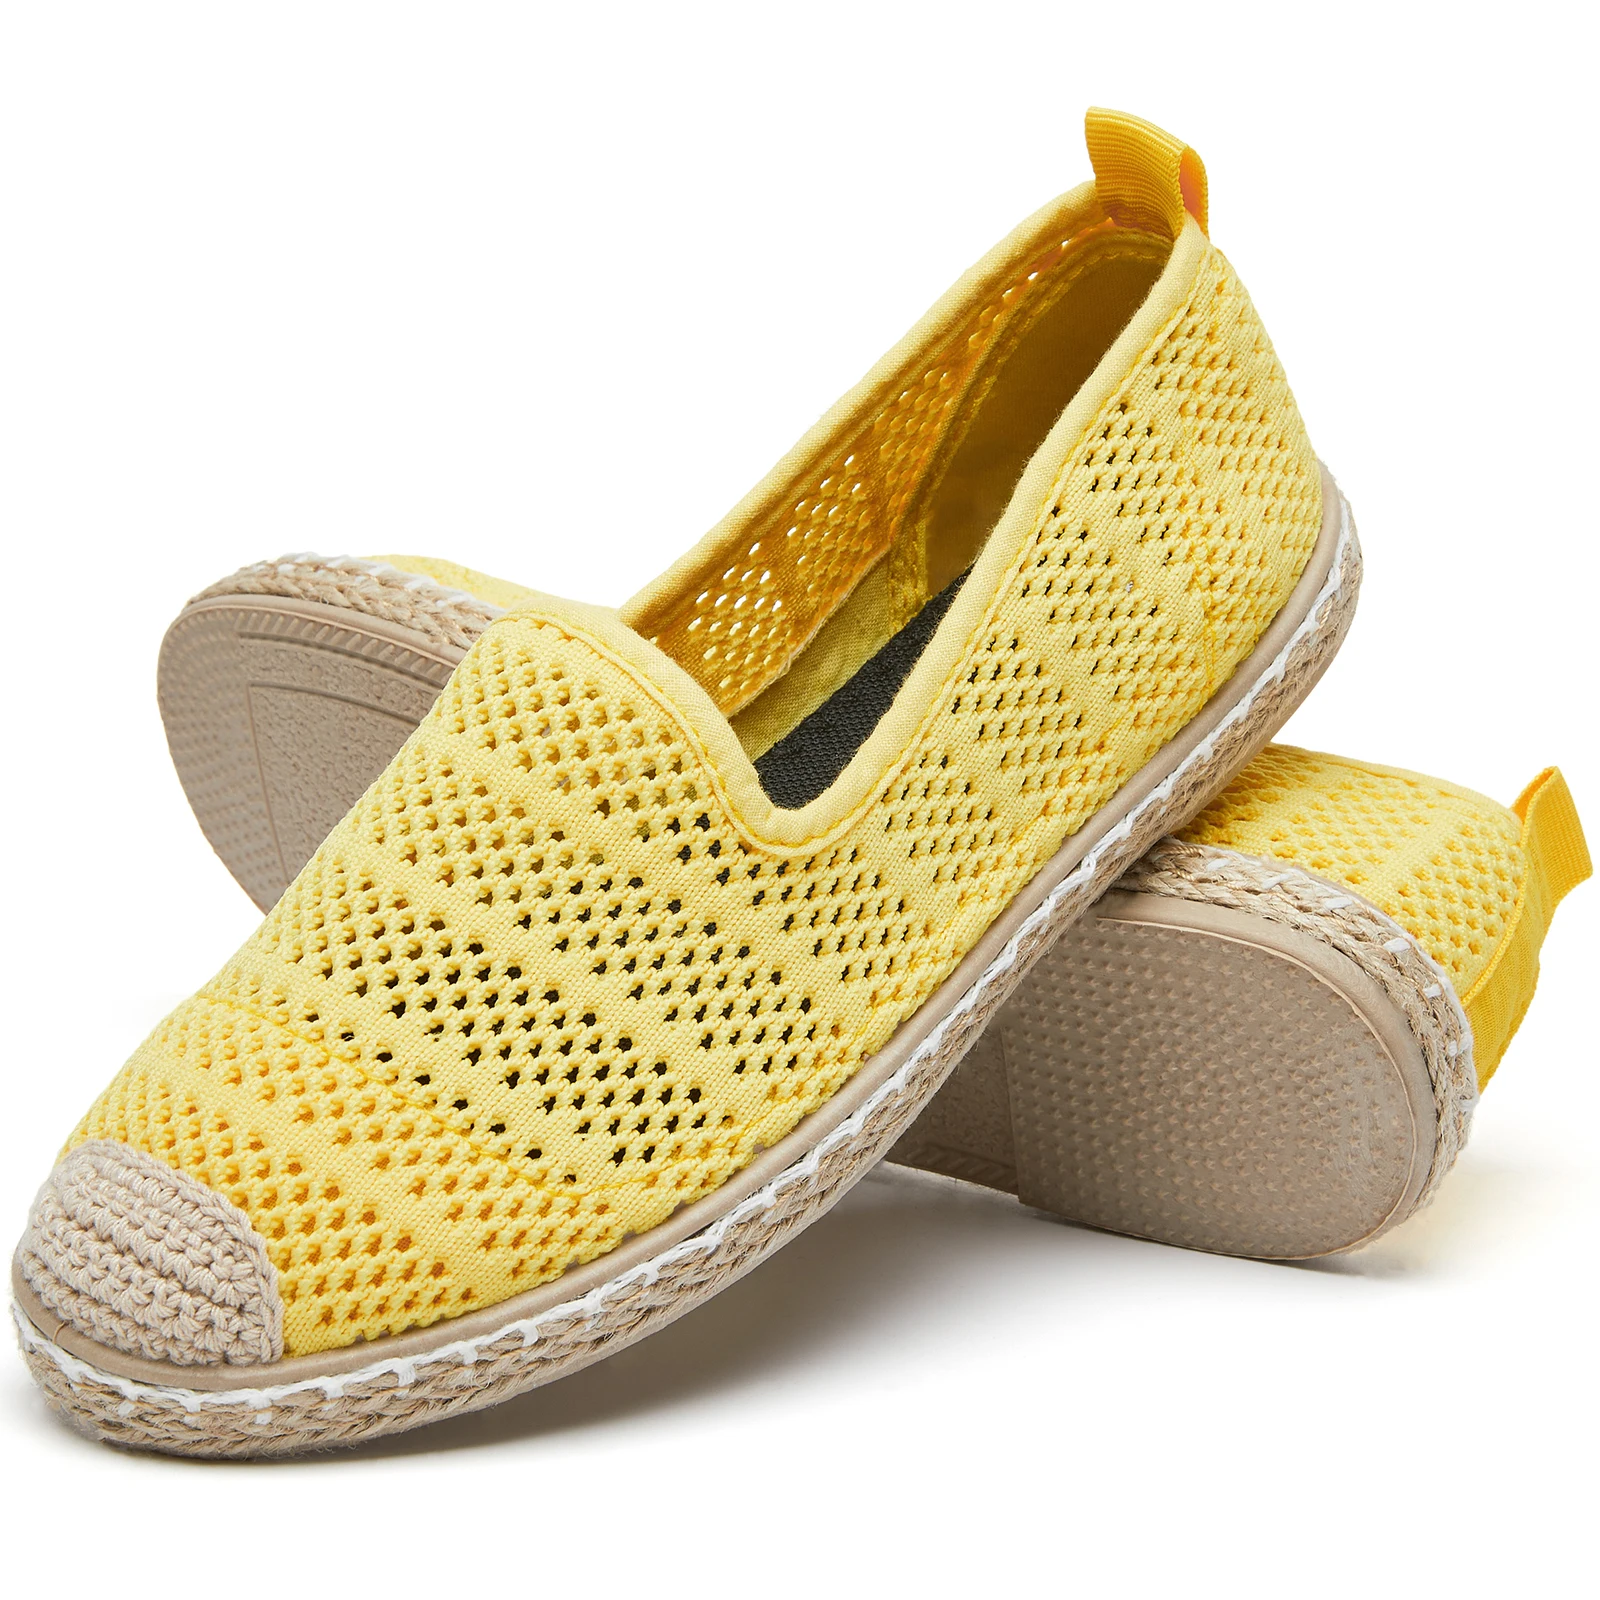 NR factory wholesale new flat shoes custom casual shoes blank women's shoes non-slip durable